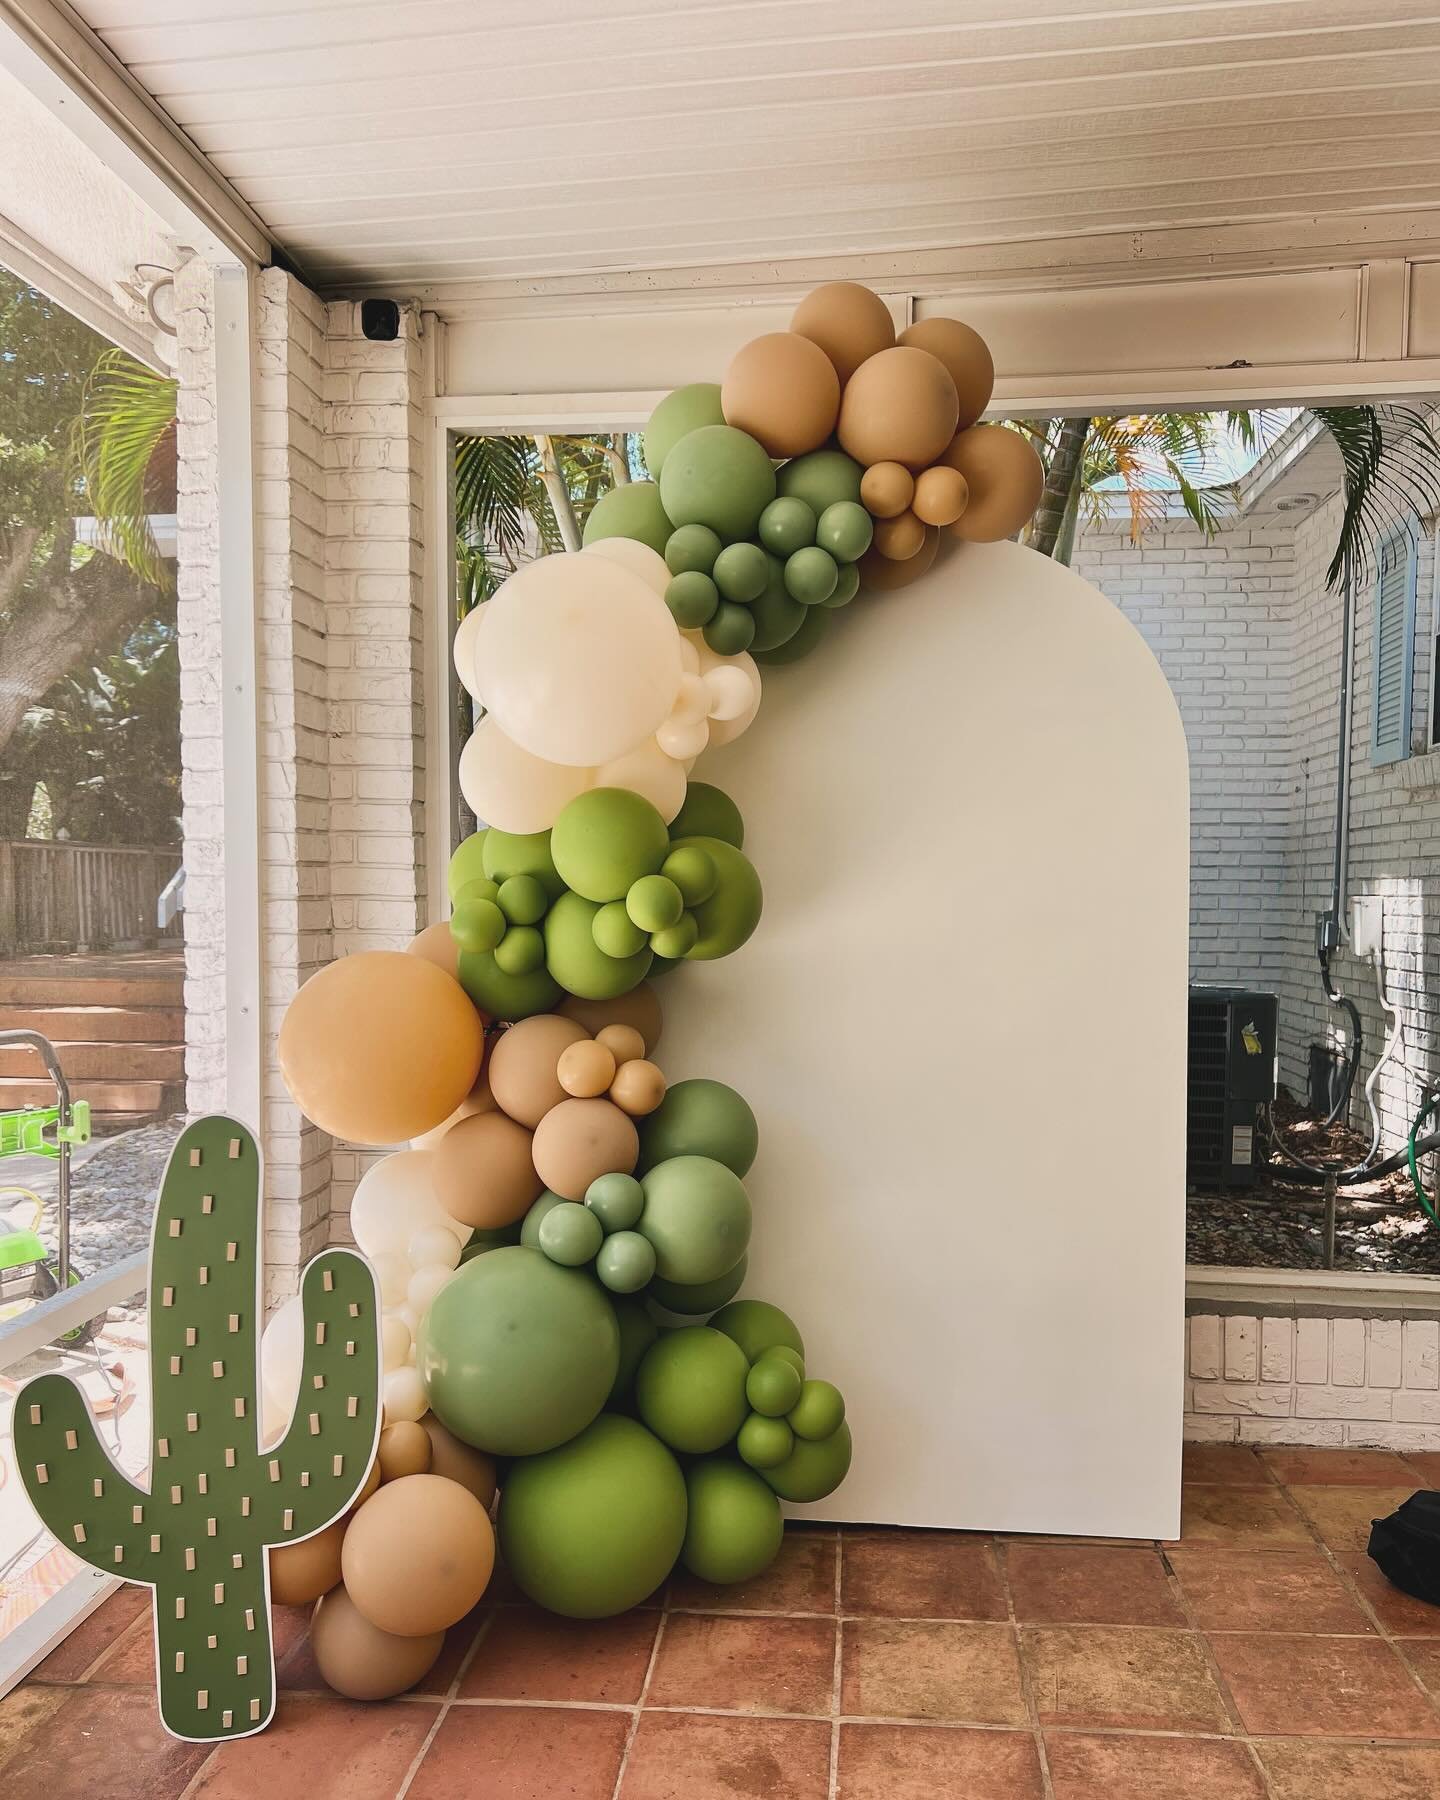 Got Cactus? 🌵
.
We just adored this color palette &amp; cactus theme for a &ldquo;Cinco de Maxo&rdquo; first birthday party! 
.
Thank you @xaxas.decor.and.printing for the adorable cactus prop 🌵
.
#firstbirthday #cincodemayoparty #cactustheme #birt